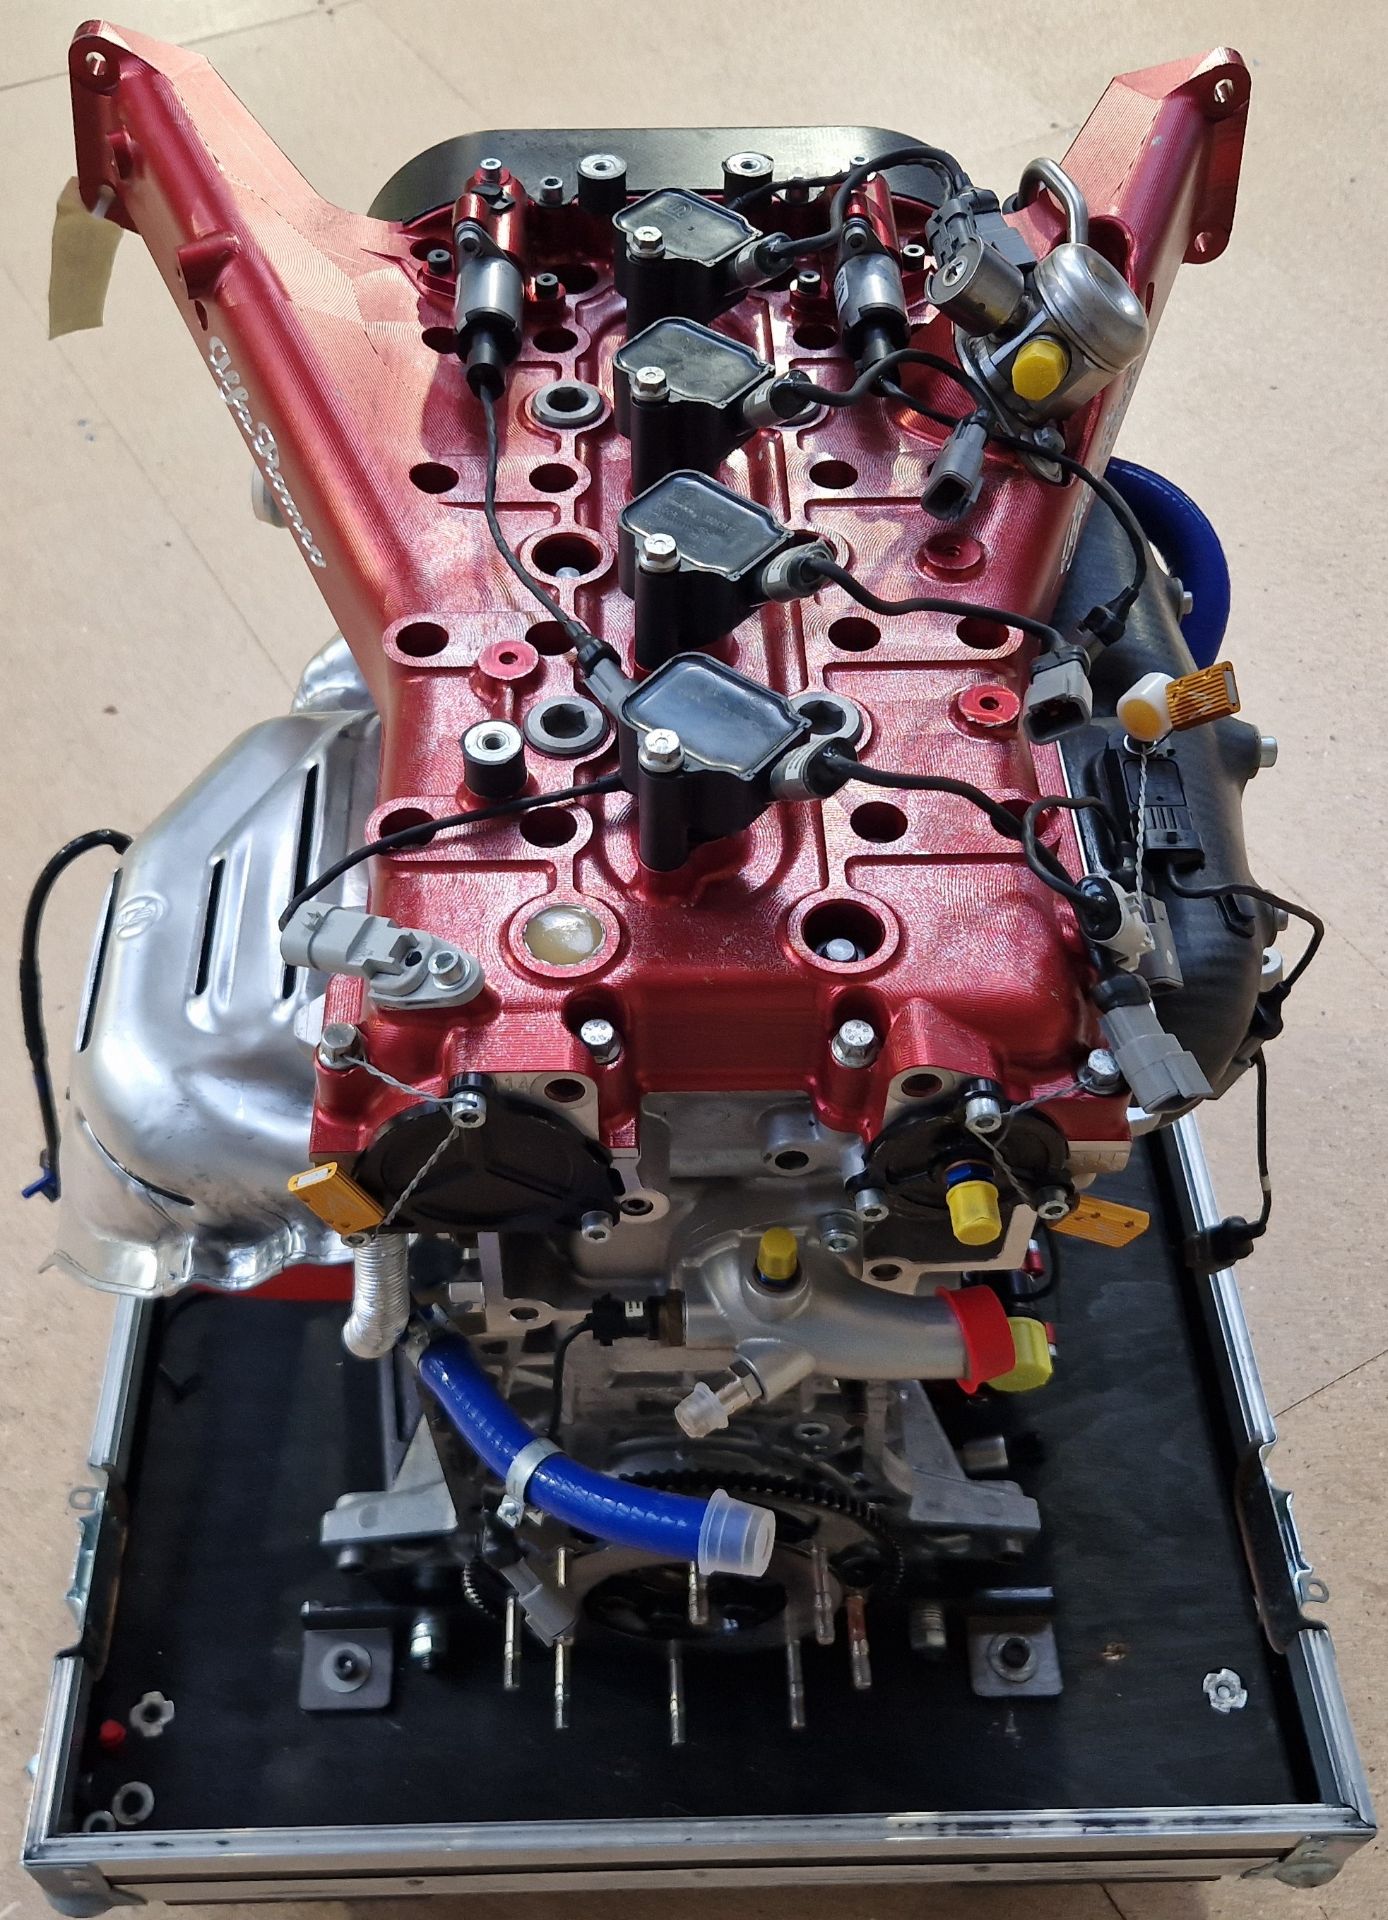 One ALPHA ROMEO 1.75L Twin Overhead Cam Turbocharged Race Car Engine, No. 042A, (believed to have - Image 2 of 6